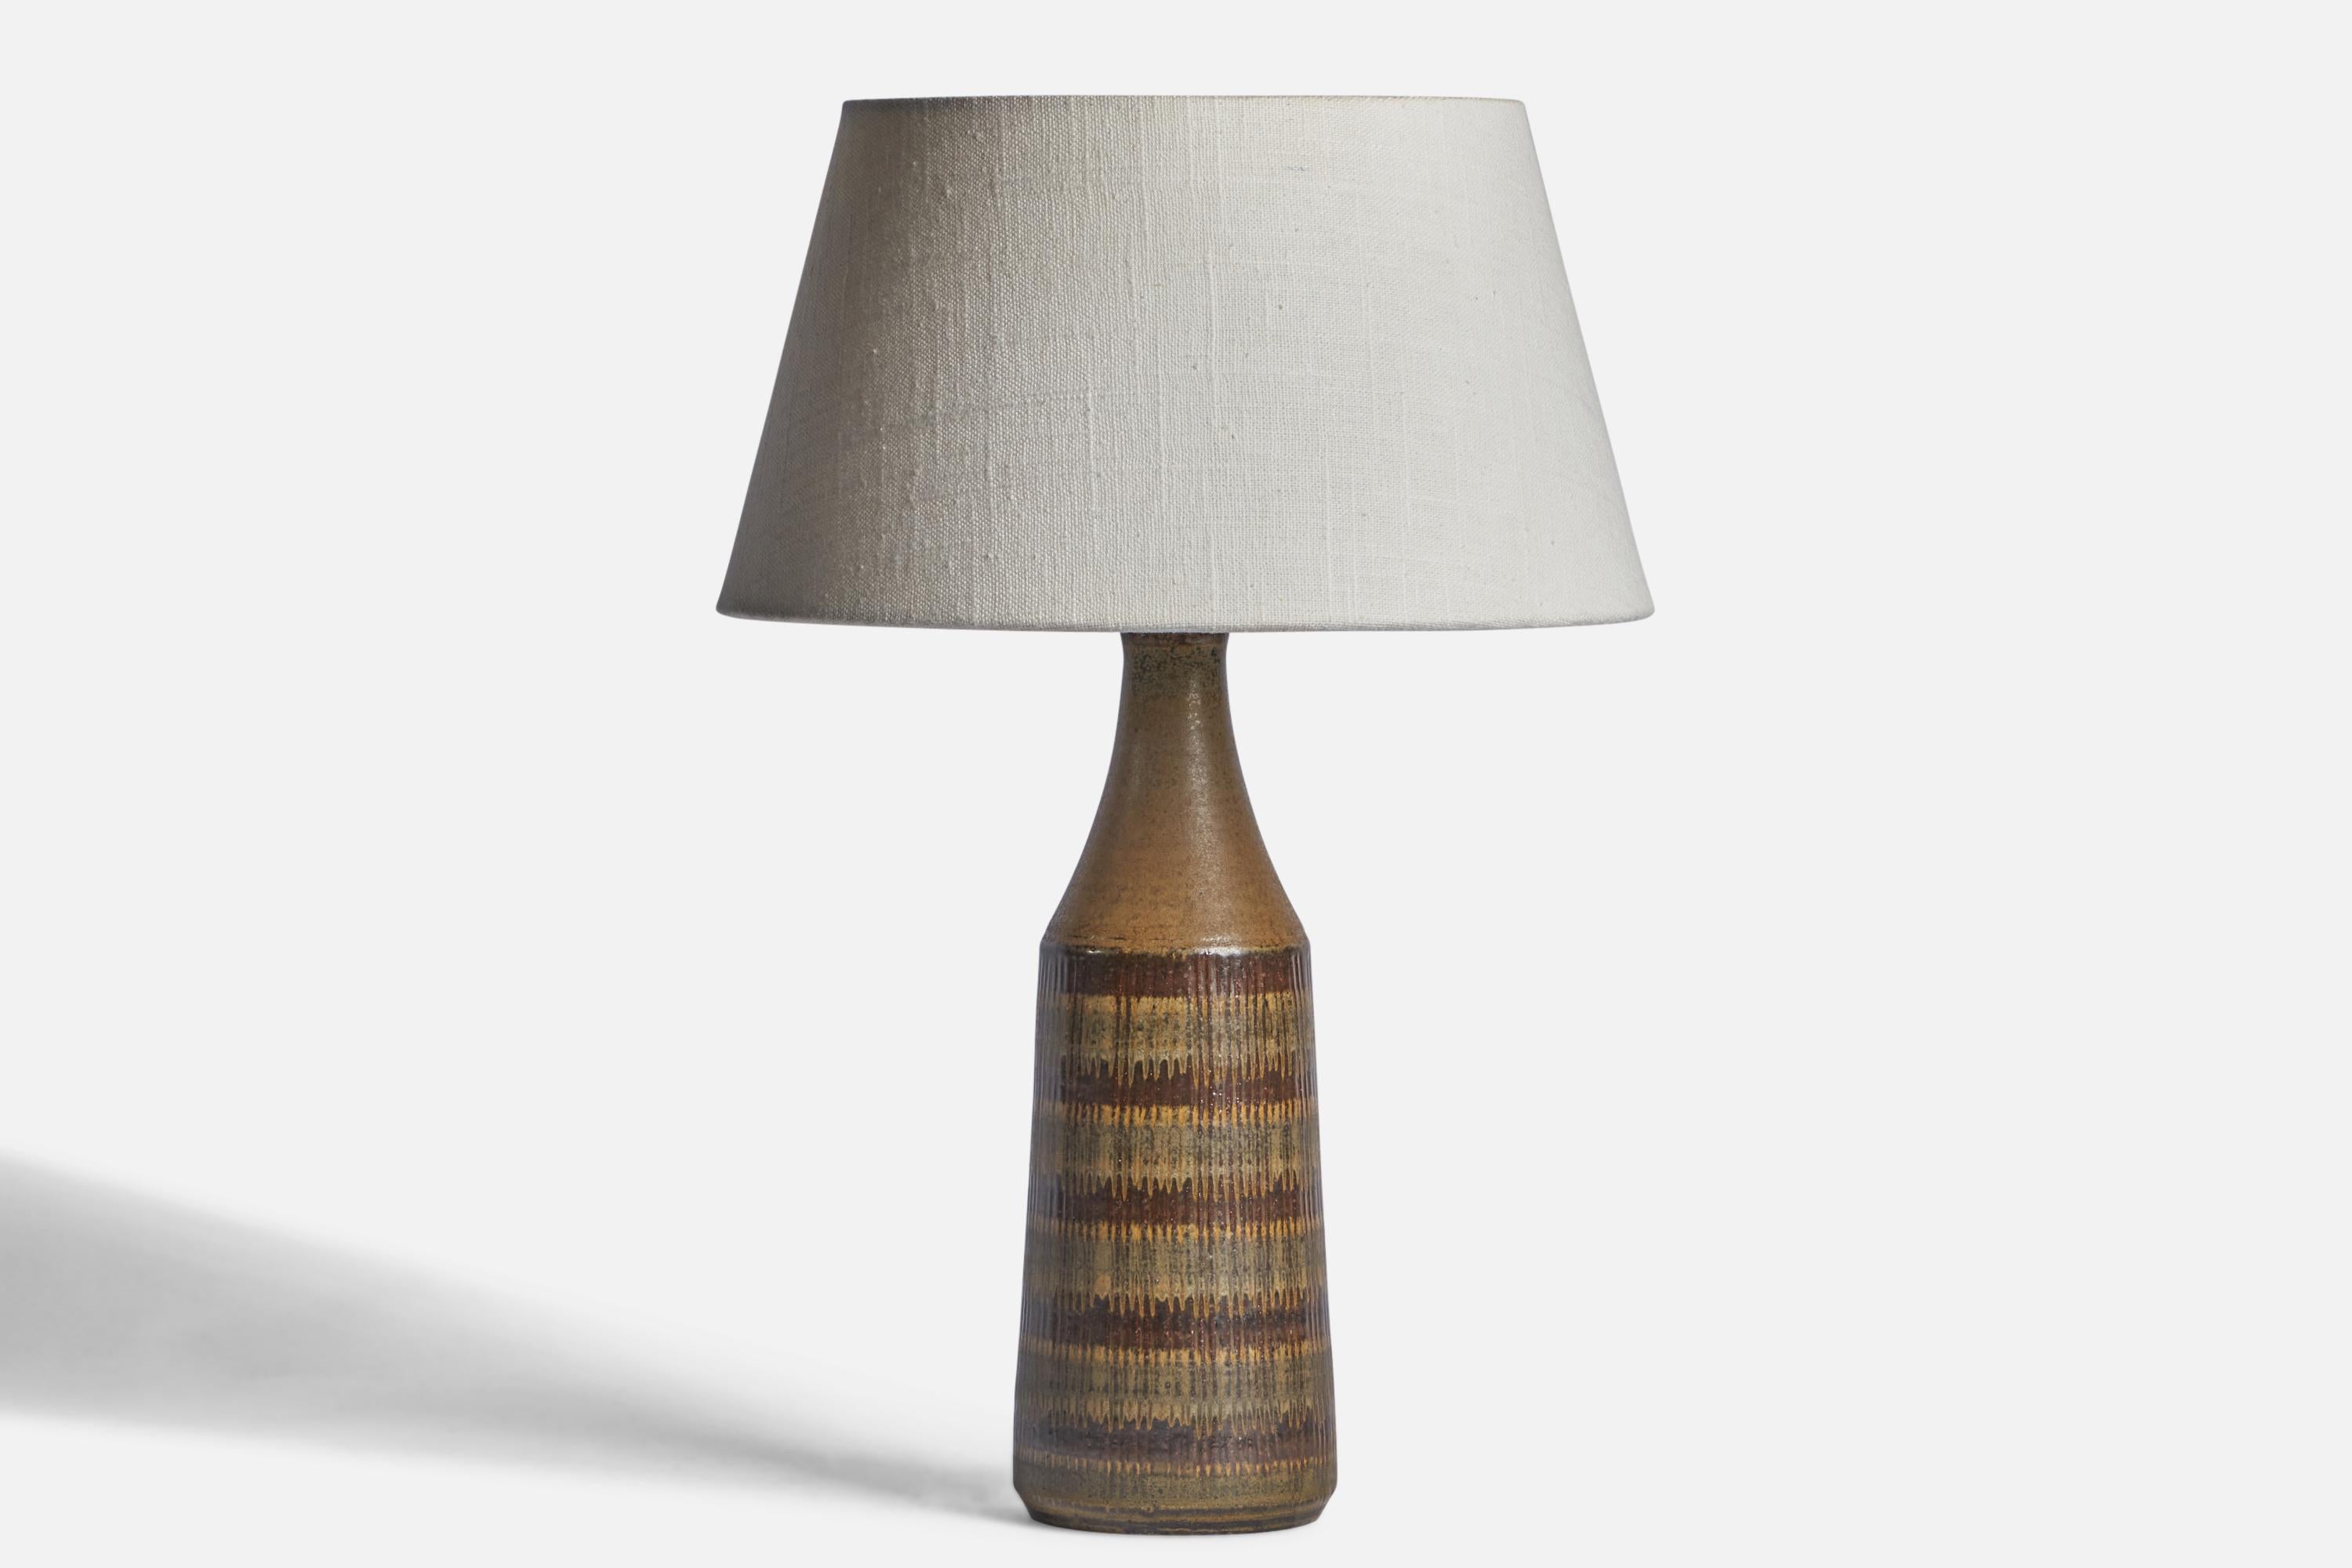 A brown-glazed stoneware table lamp designed and produced by Wallåkra, Sweden, 1950s.

Dimensions of Lamp (inches): 11.95” H x 3.5” Diameter
Dimensions of Shade (inches): 7” Top Diameter x 10” Bottom Diameter x 5.5” H 
Dimensions of Lamp with Shade